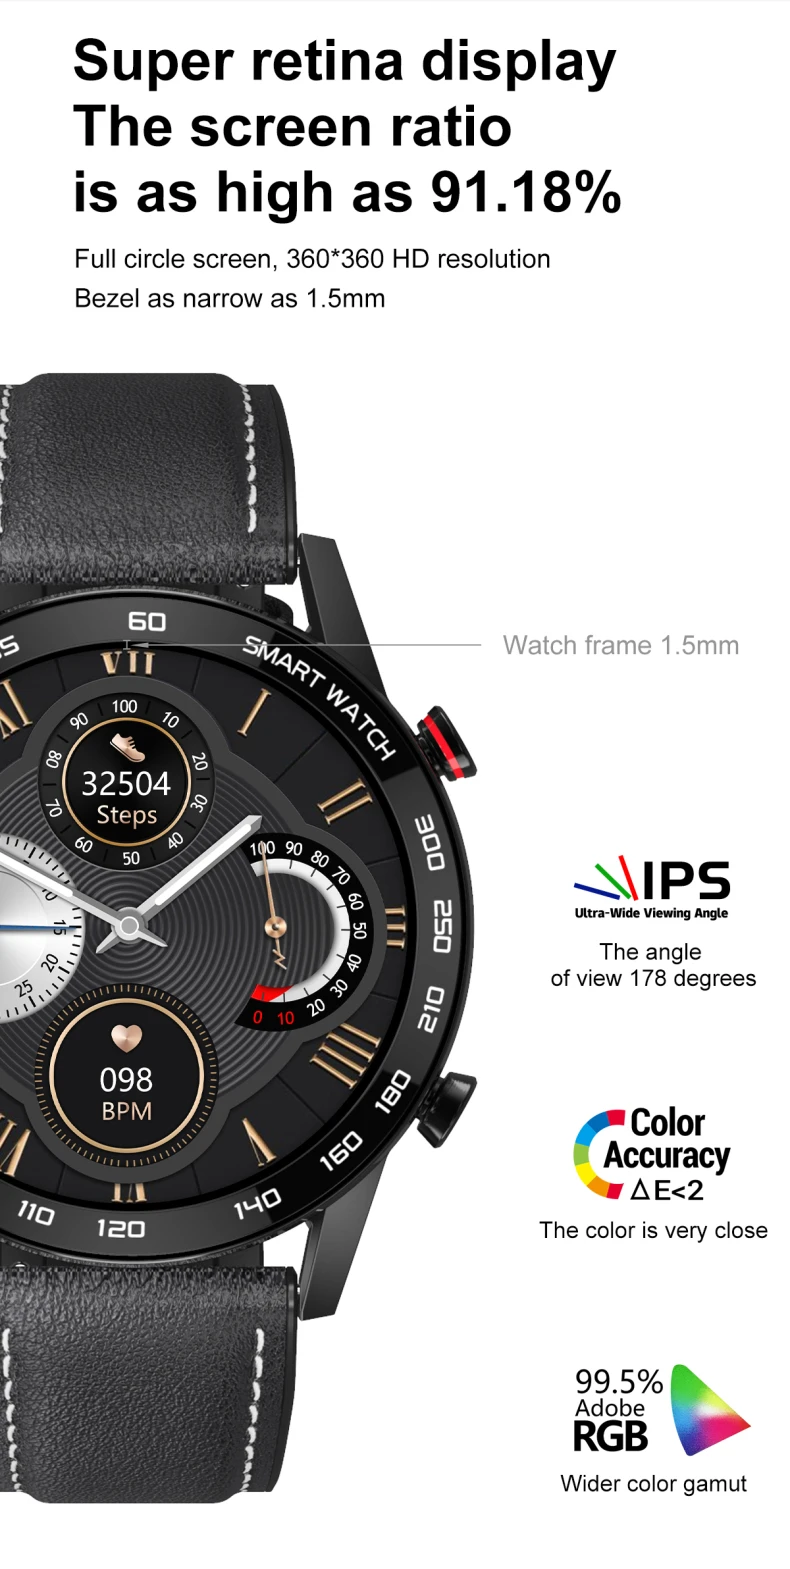 NO.1 Smart Watch DT95t/DT95 Pro/DT95Pro with Super retina display, The screen ratio is as high as 91.18% - Full circle screen, 360*360 HD resolution, Bezel as narrow as 1.5mm.jpg